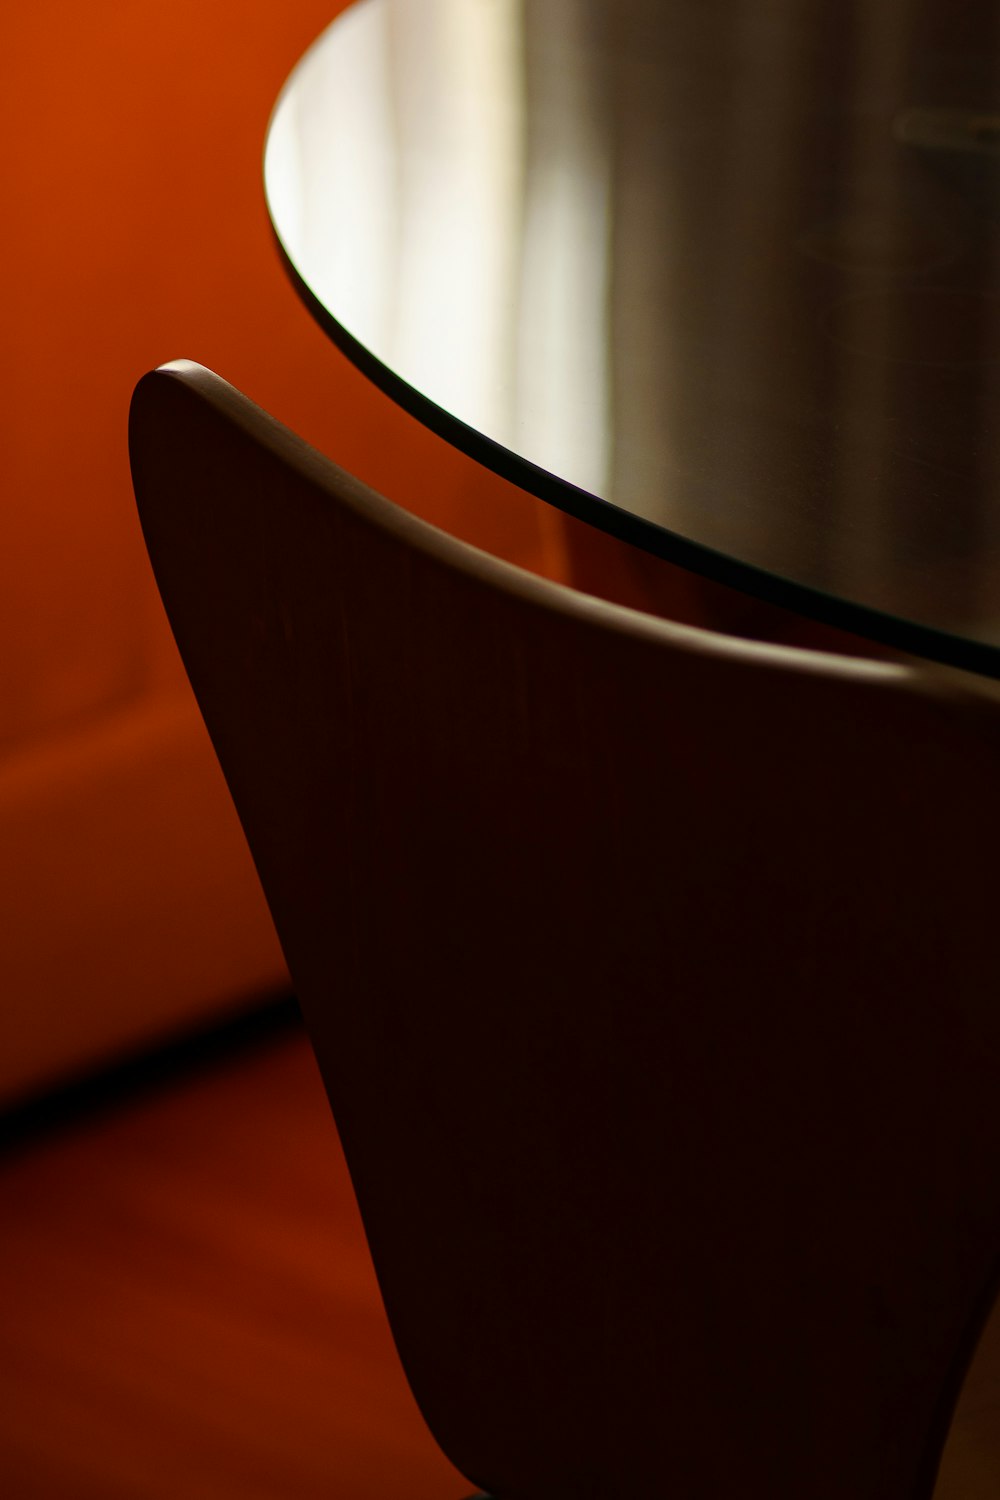 a close up of a table with an orange chair in the background